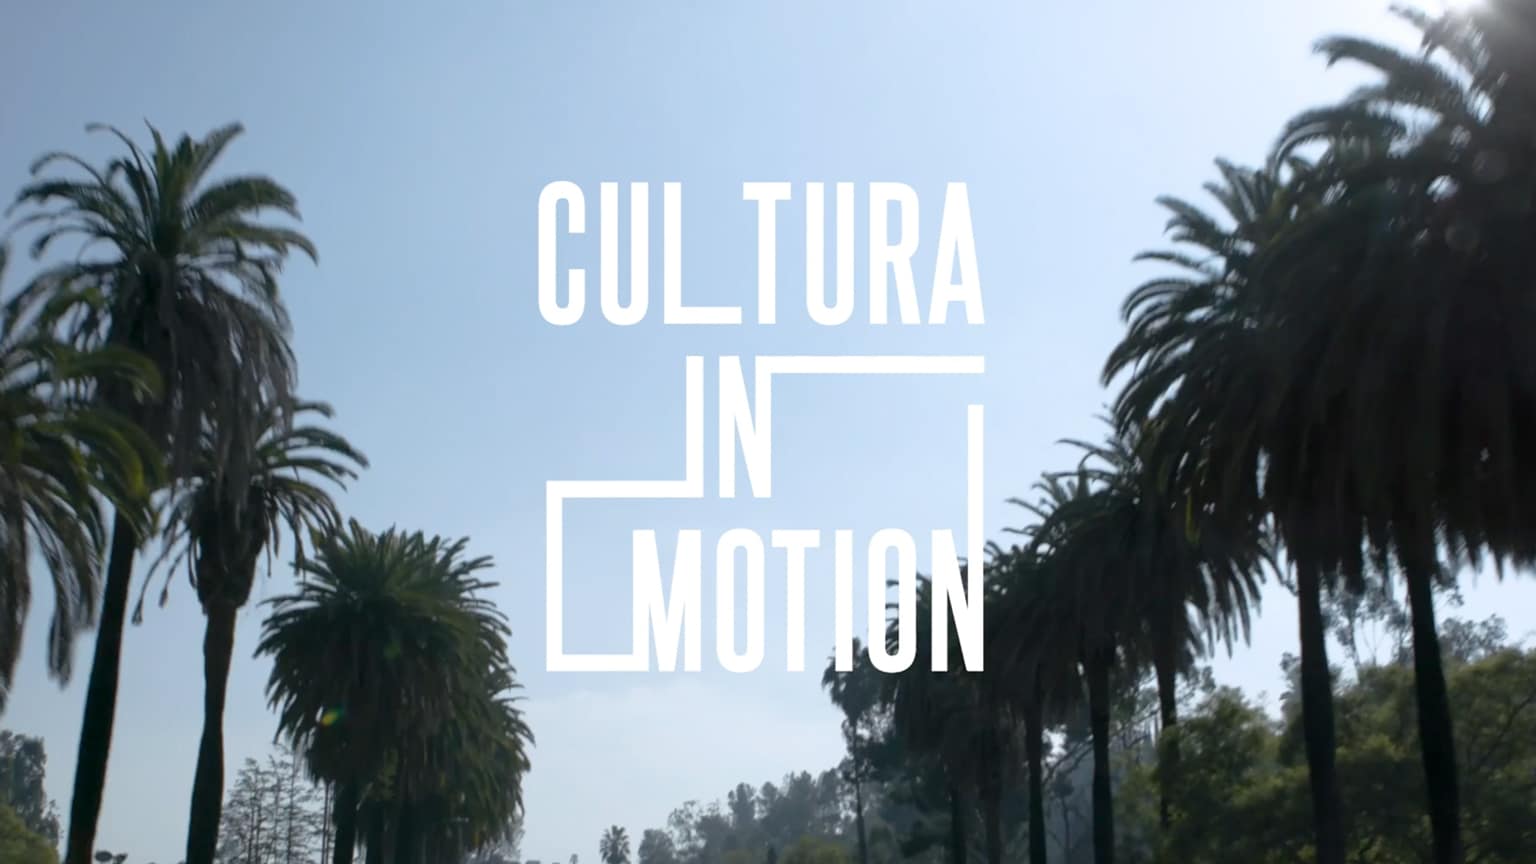 INFINITI and Cultura in Motion